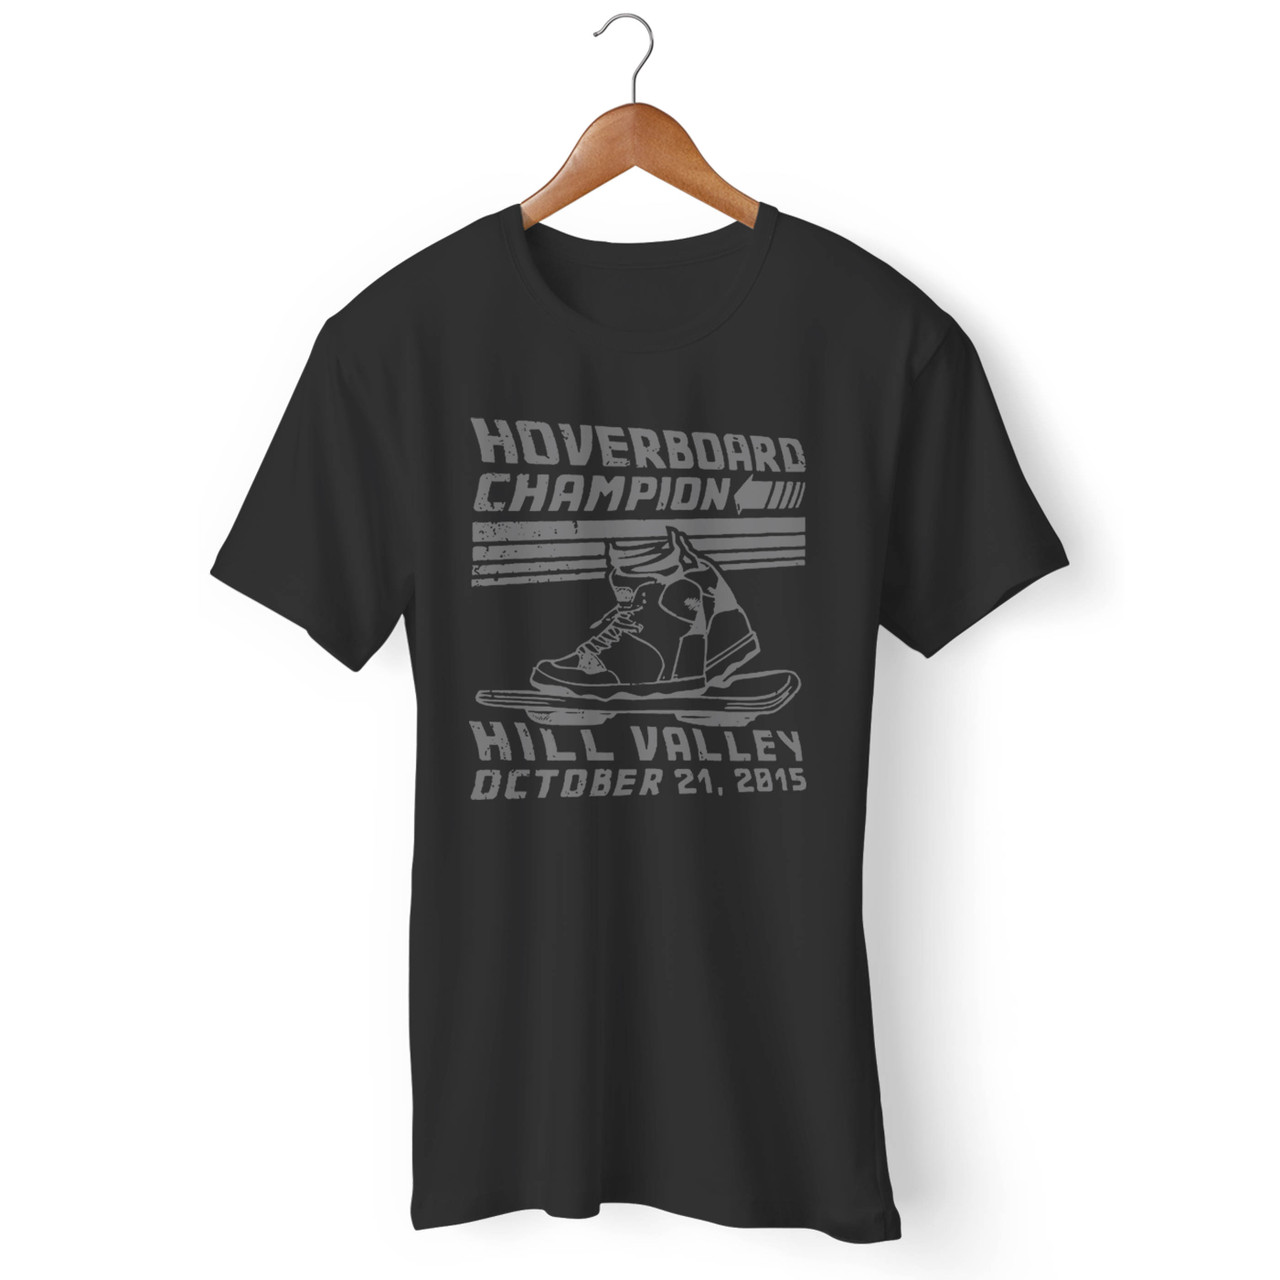 hill valley hoverboard champion shirt